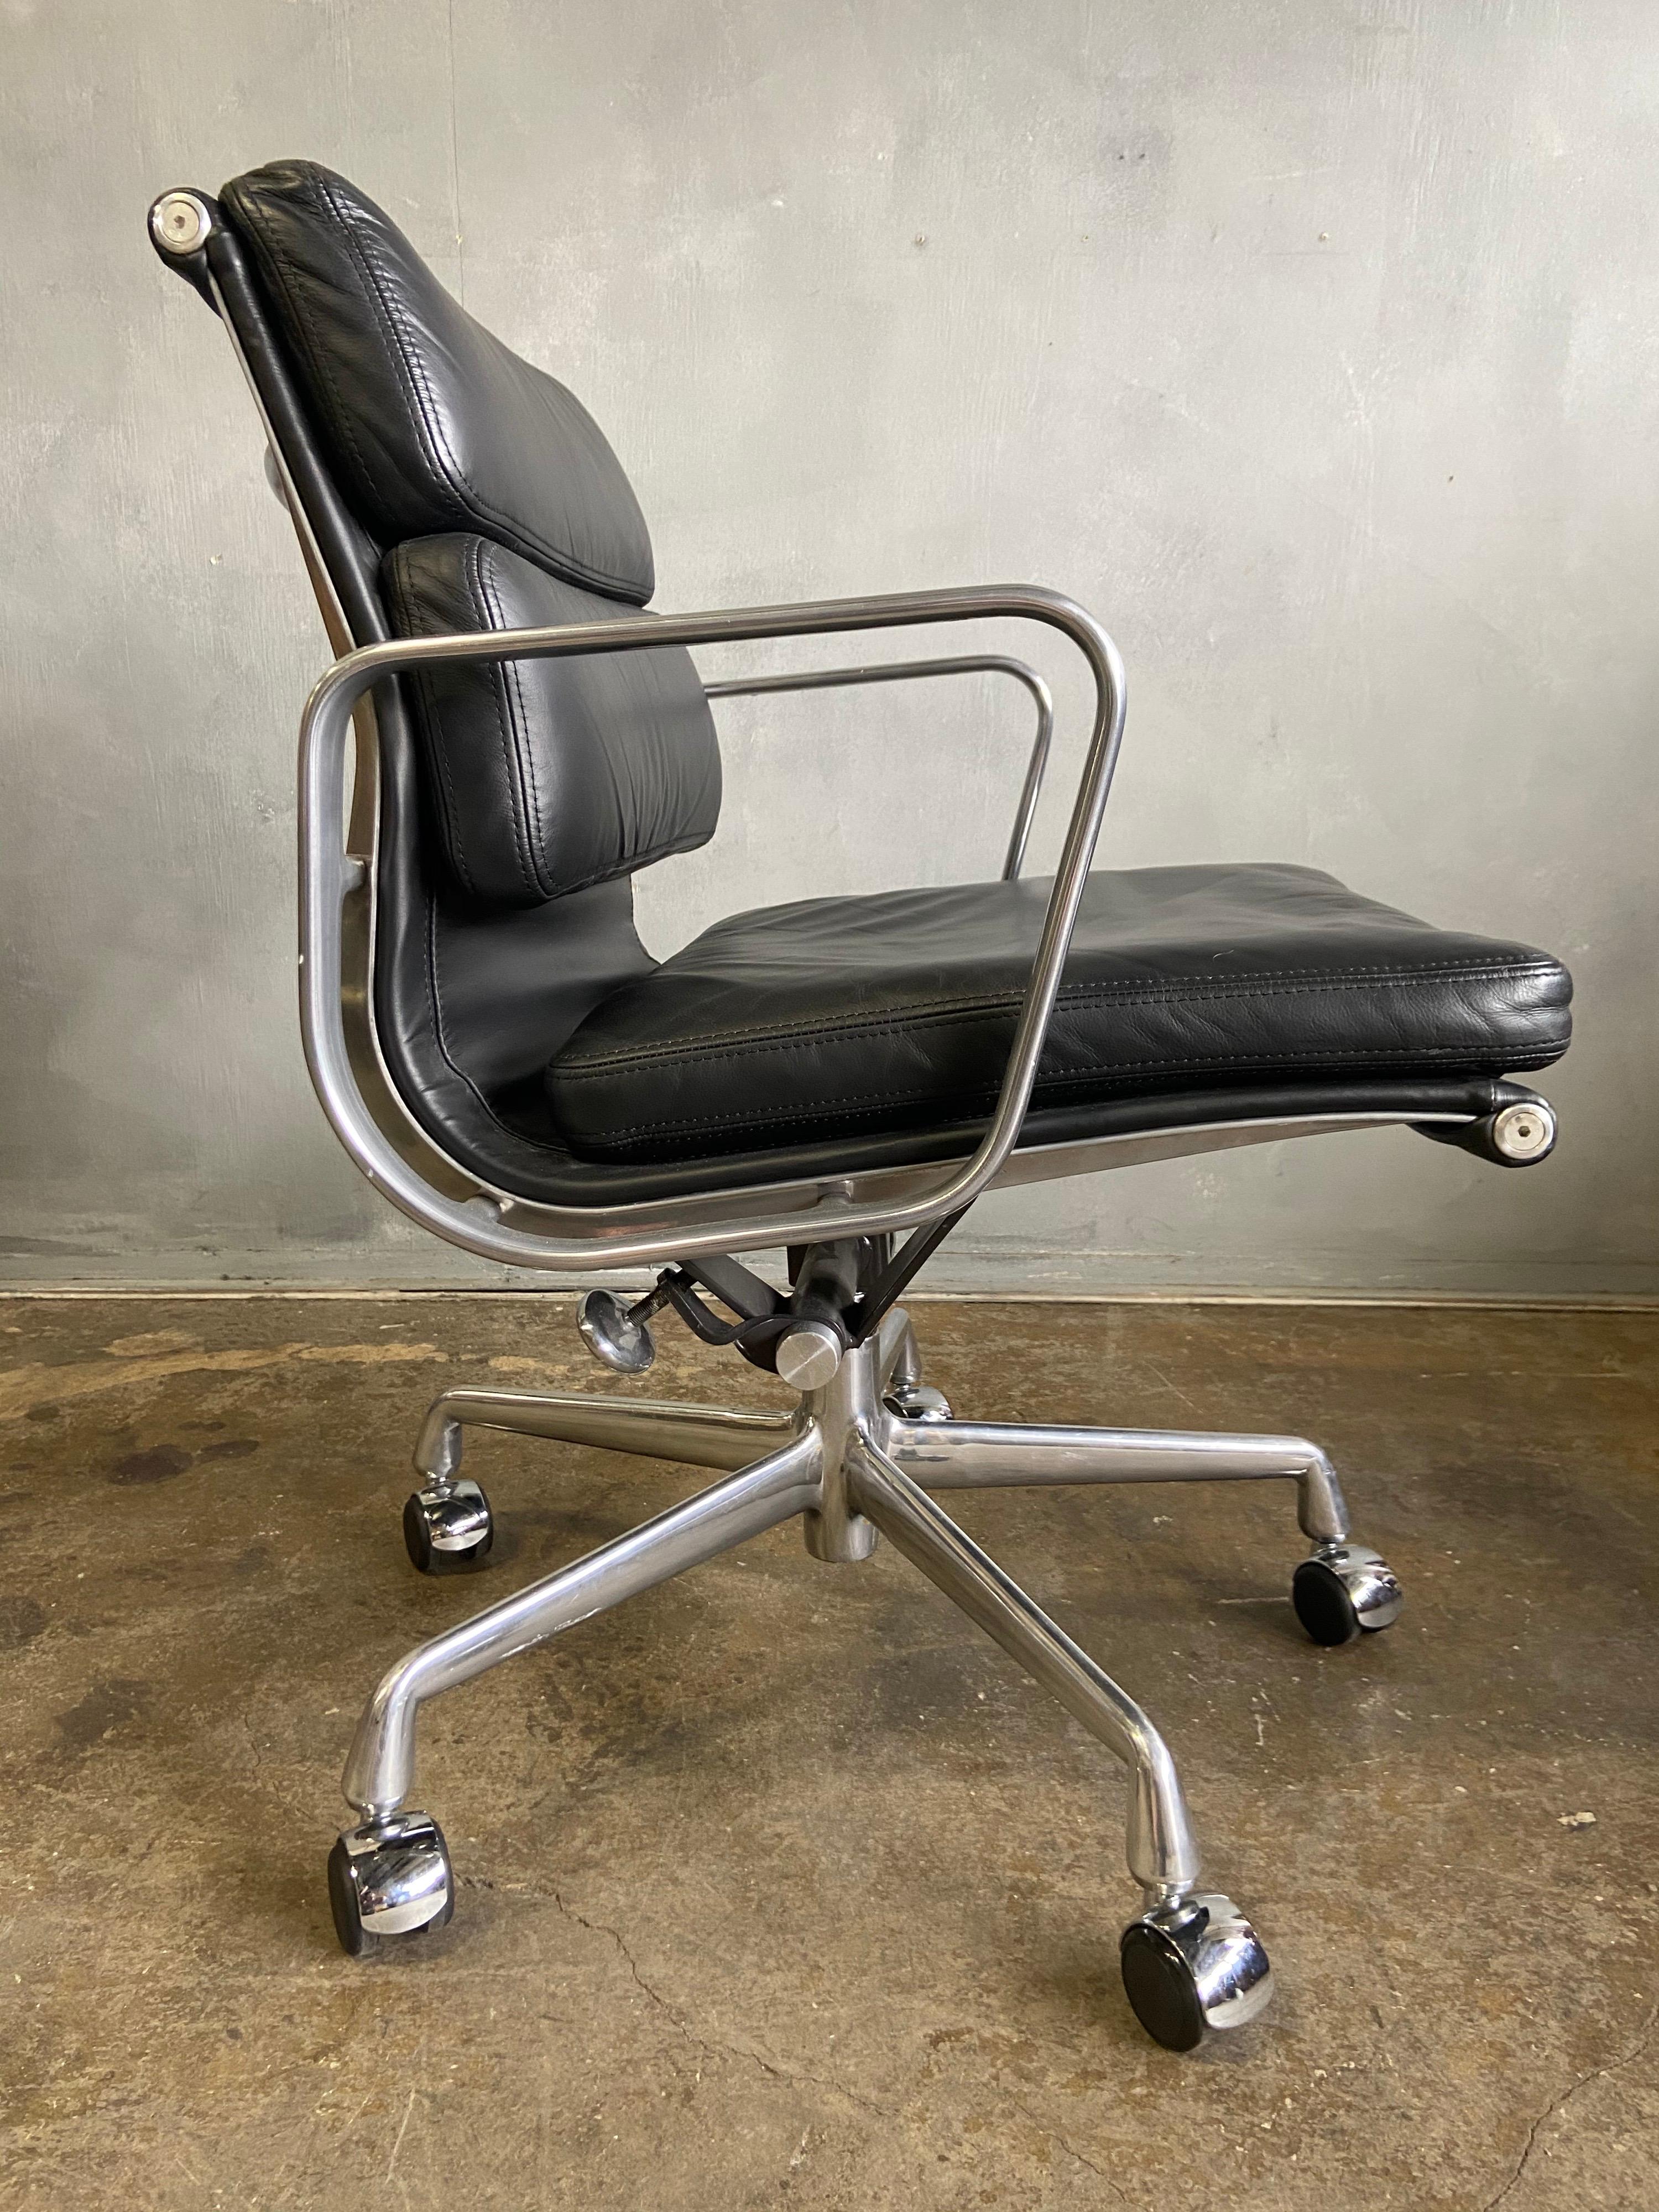 For your consideration we have up to 50 Eames for Herman Miller Soft Pad chairs in black leather with low backs. With classic tilt and manual height adjustment. 
These authentic vintage examples are icons of Mid-Century Modern design. The chairs